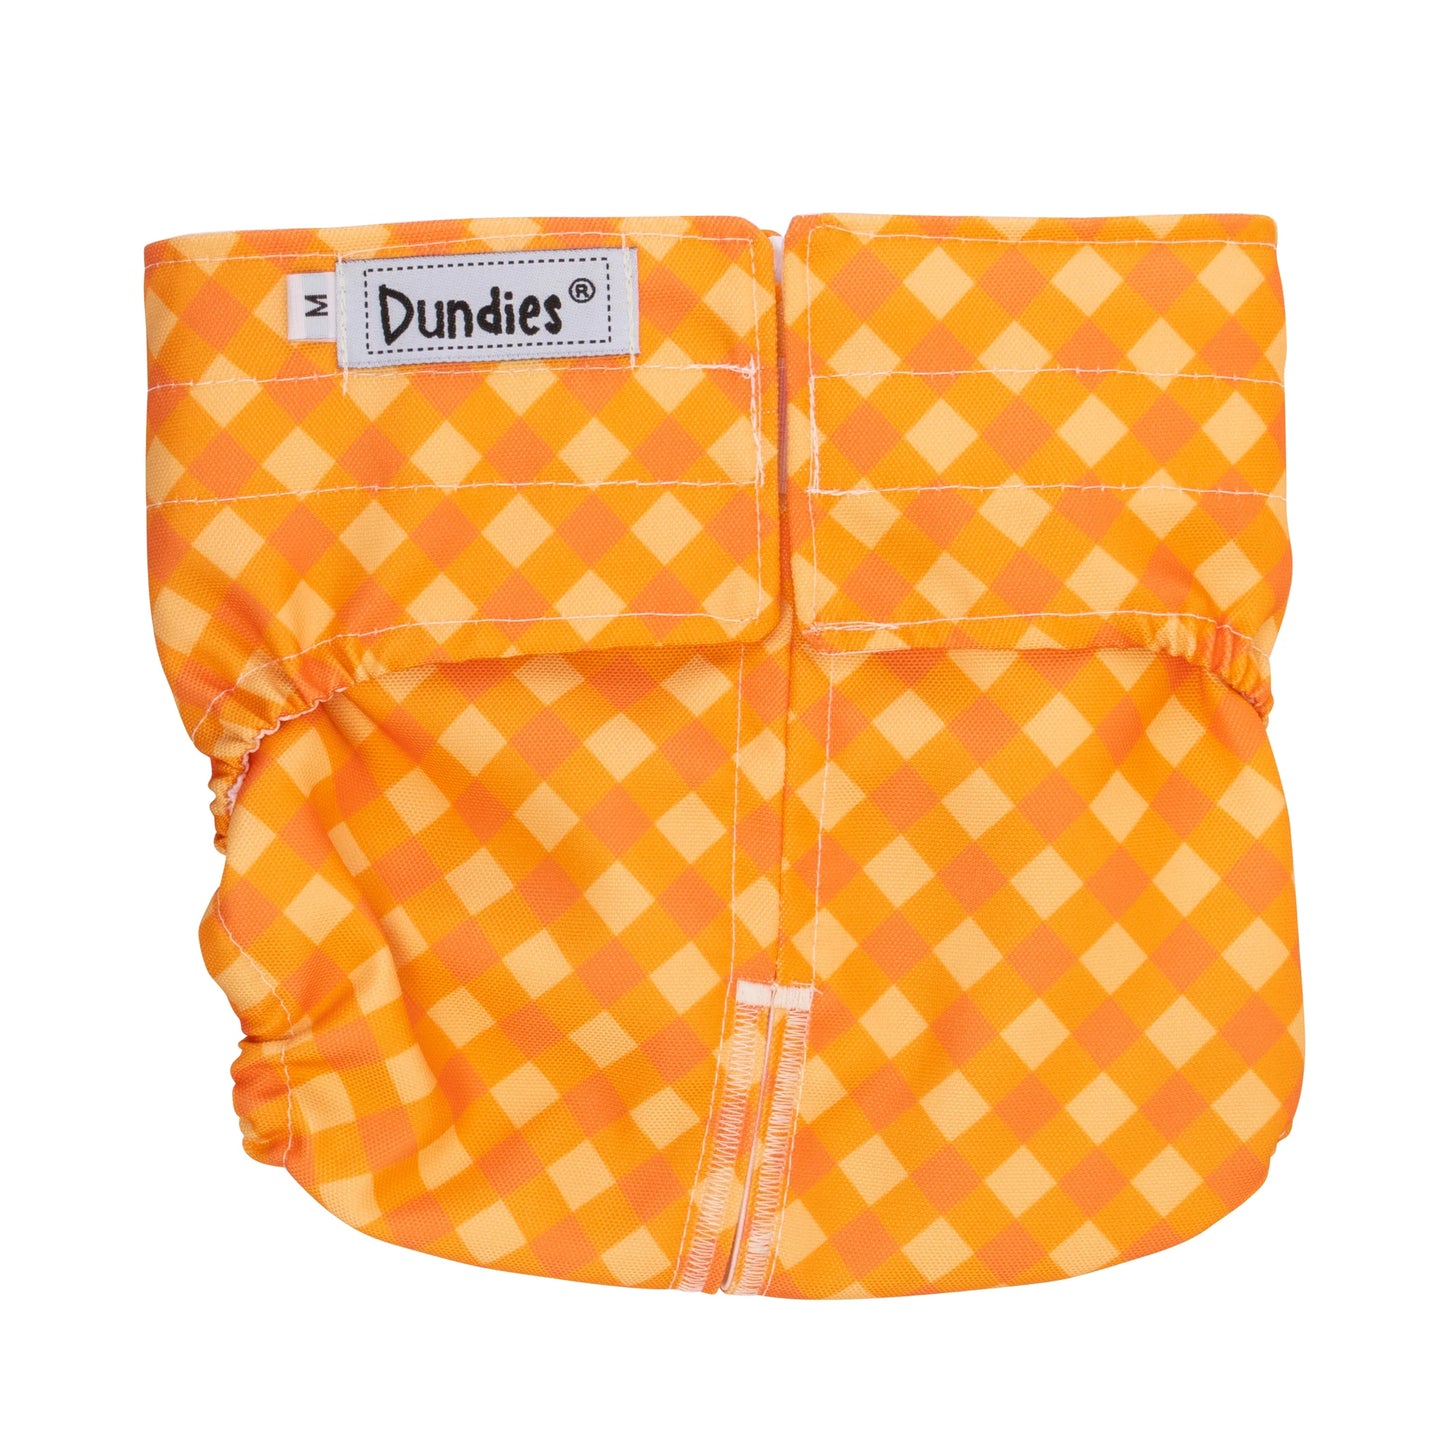 Dundies All In One Nappy with tail hole